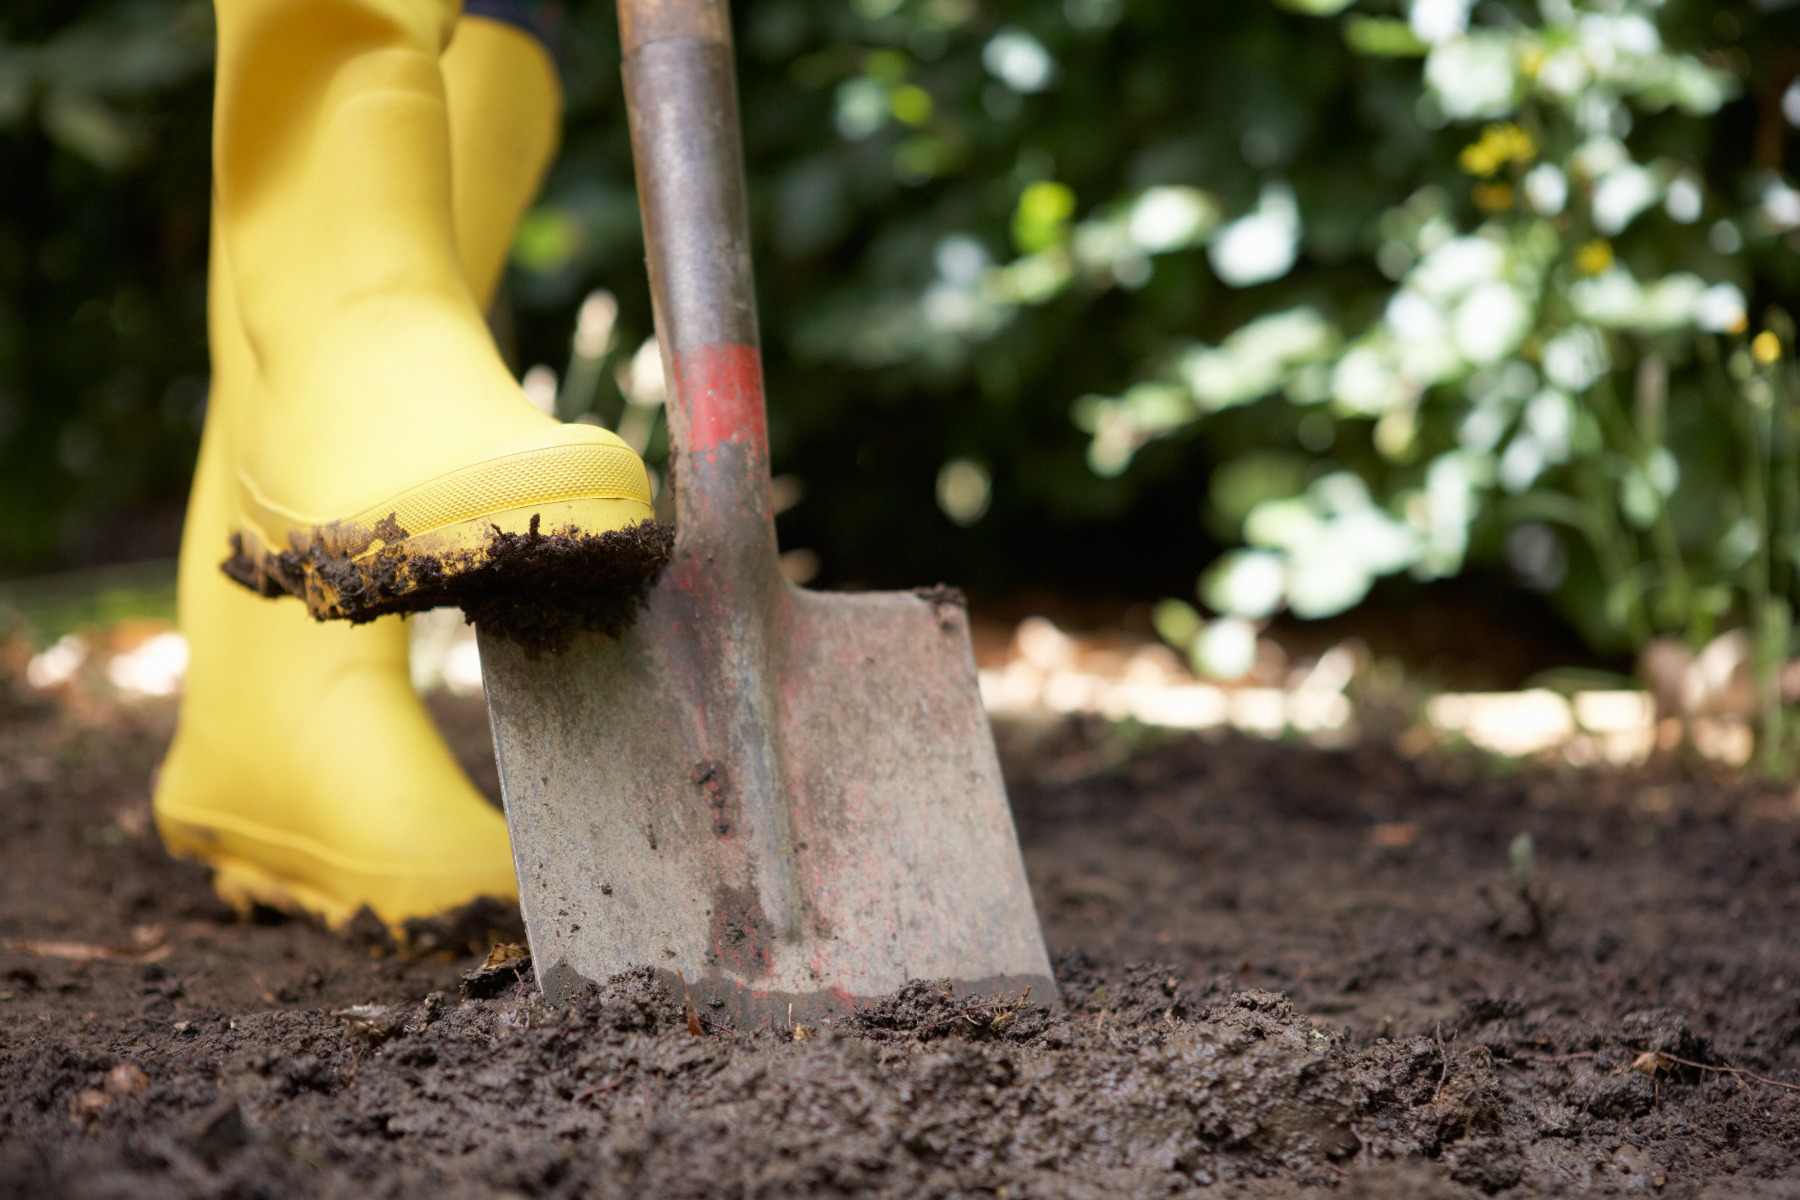 A person wearing yellow wellies digging using a shovel.